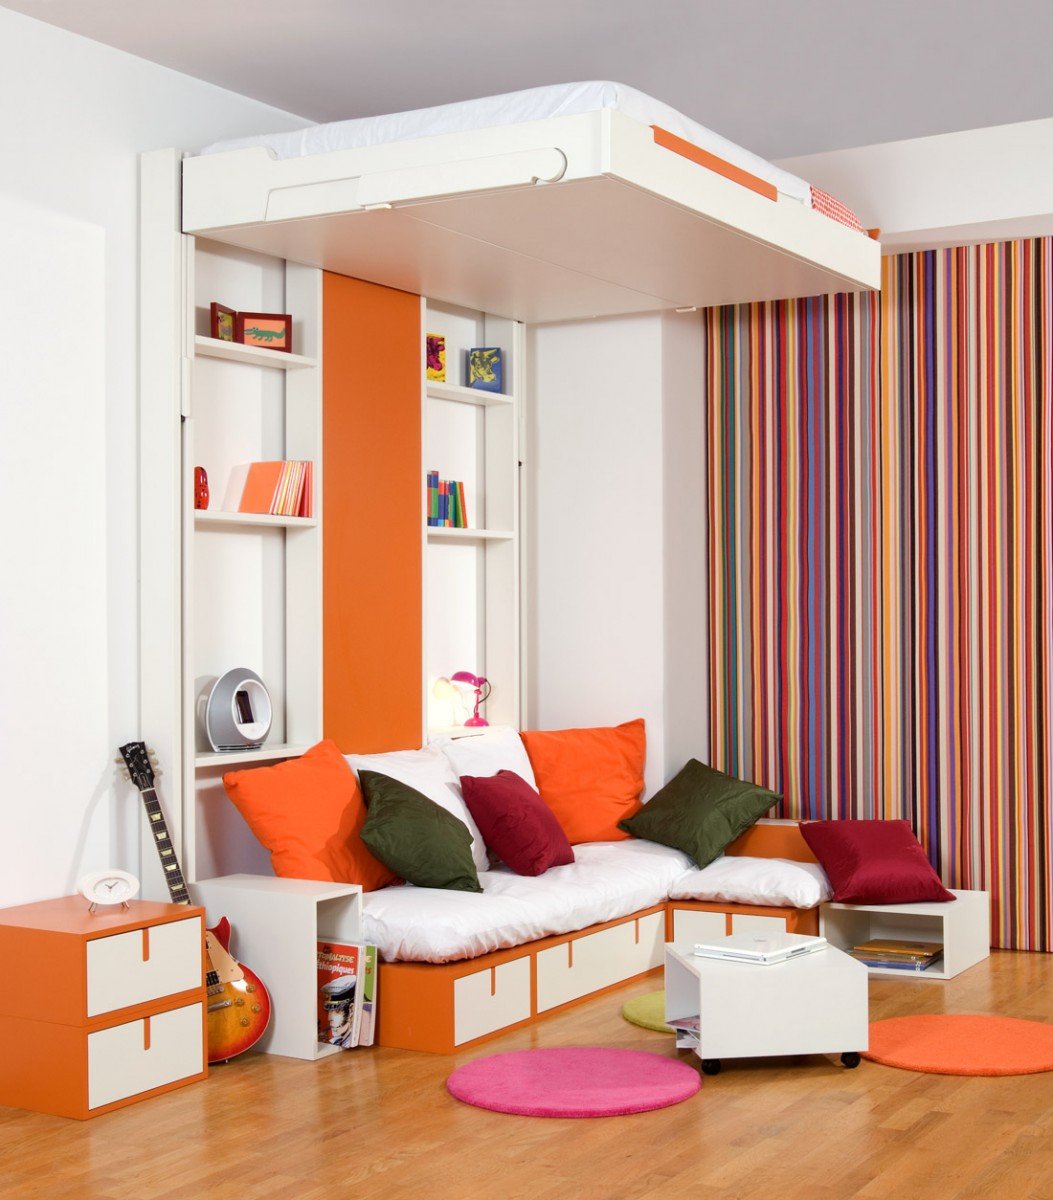 A space-saving orange and white room with a bed and a guitar.